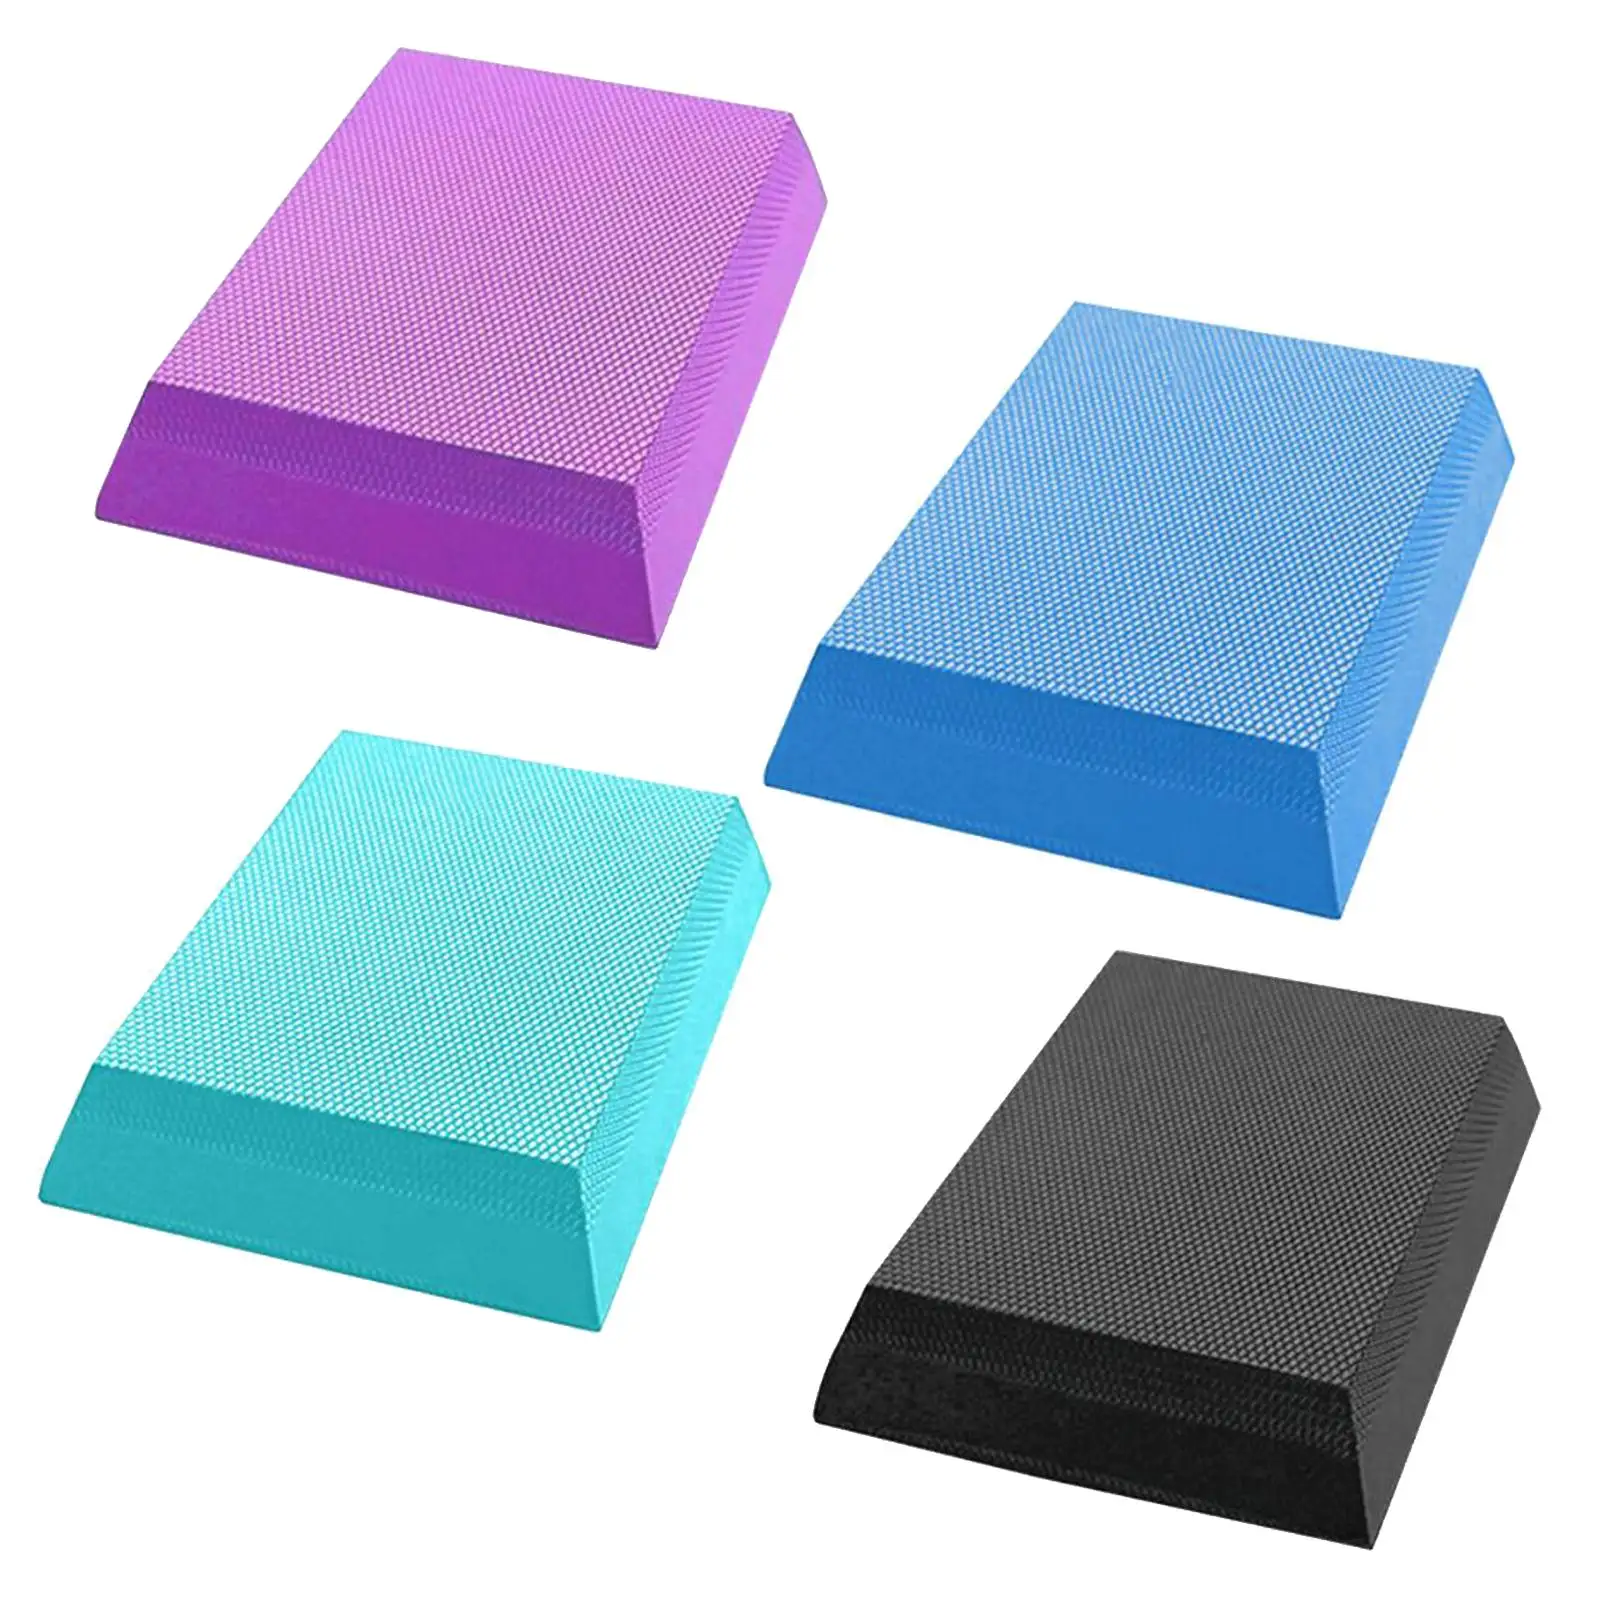 Exercise balance mat Foam Mat Cushion TPE Trainer Equipment Stability Trainer Pad for Yoga Stretching Adults Indoor Training